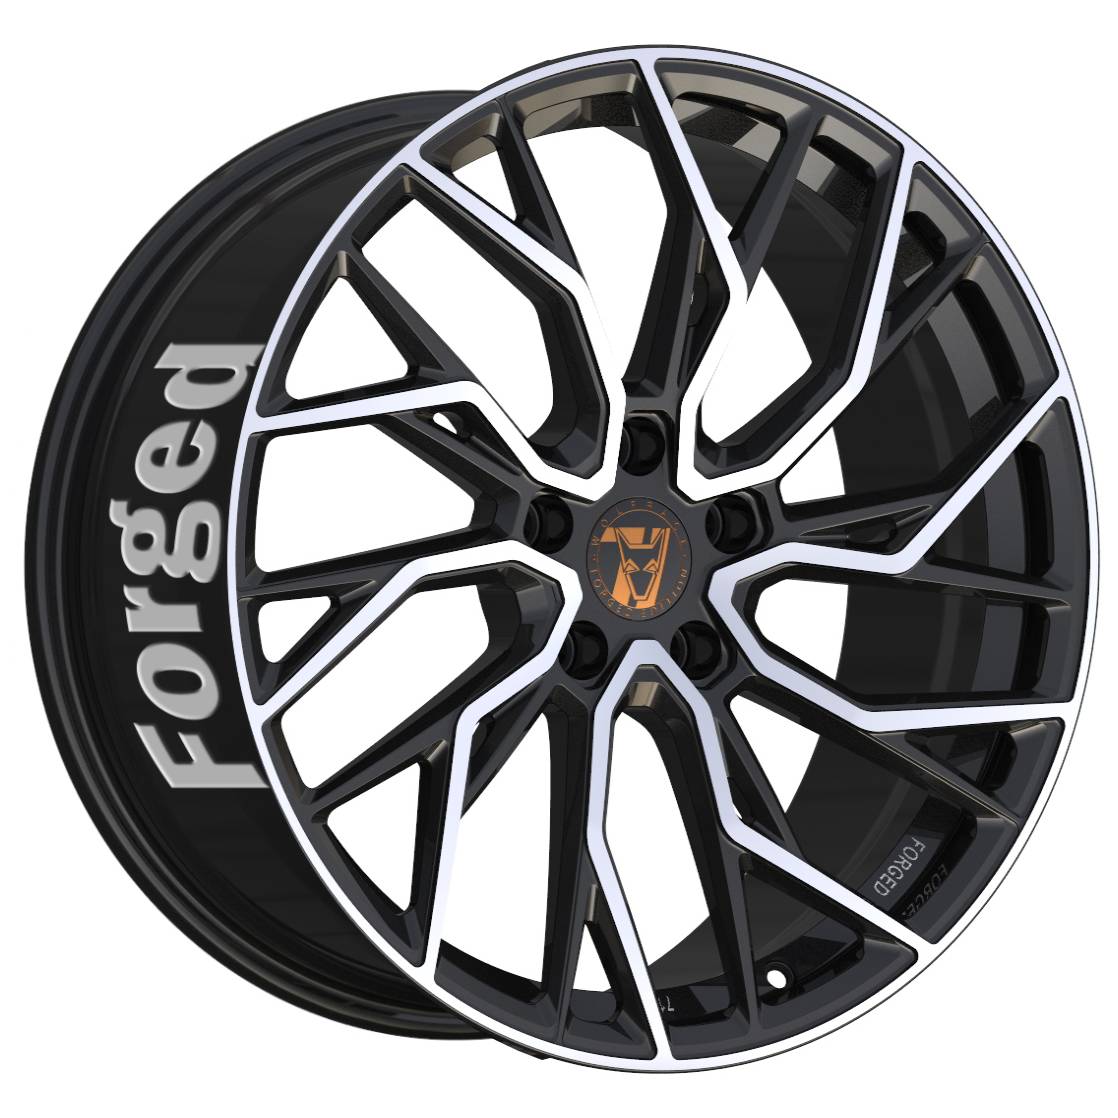 Jantes alu Demon Wheels 71 Forged Edition Voodoo Forged [13x23] -5x114.3- ET 45